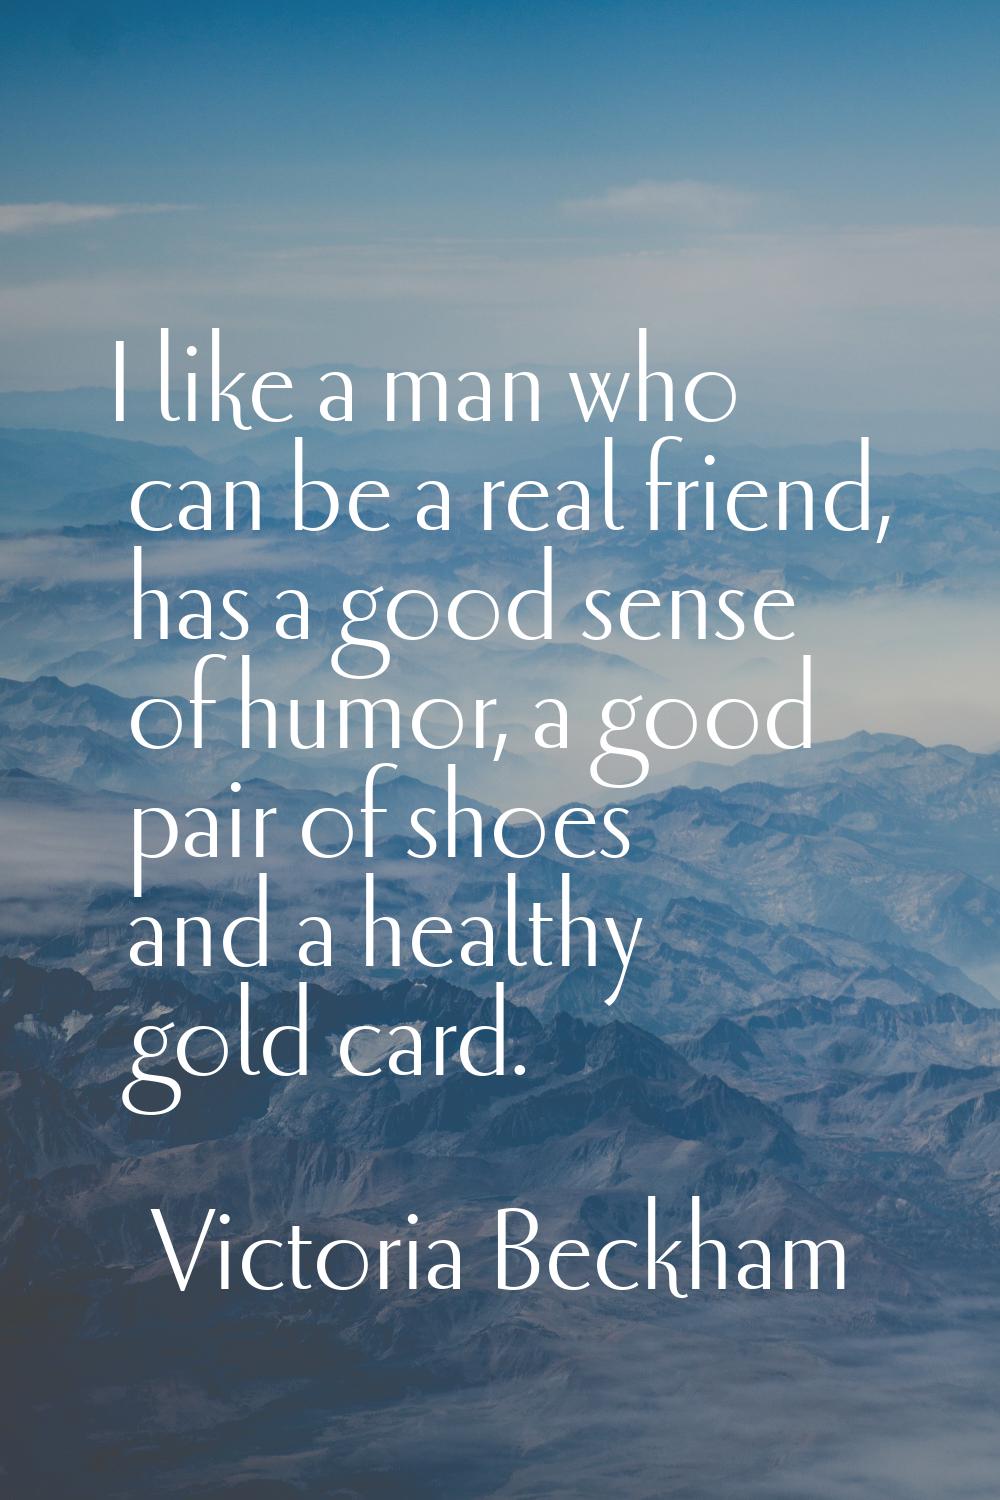 I like a man who can be a real friend, has a good sense of humor, a good pair of shoes and a health